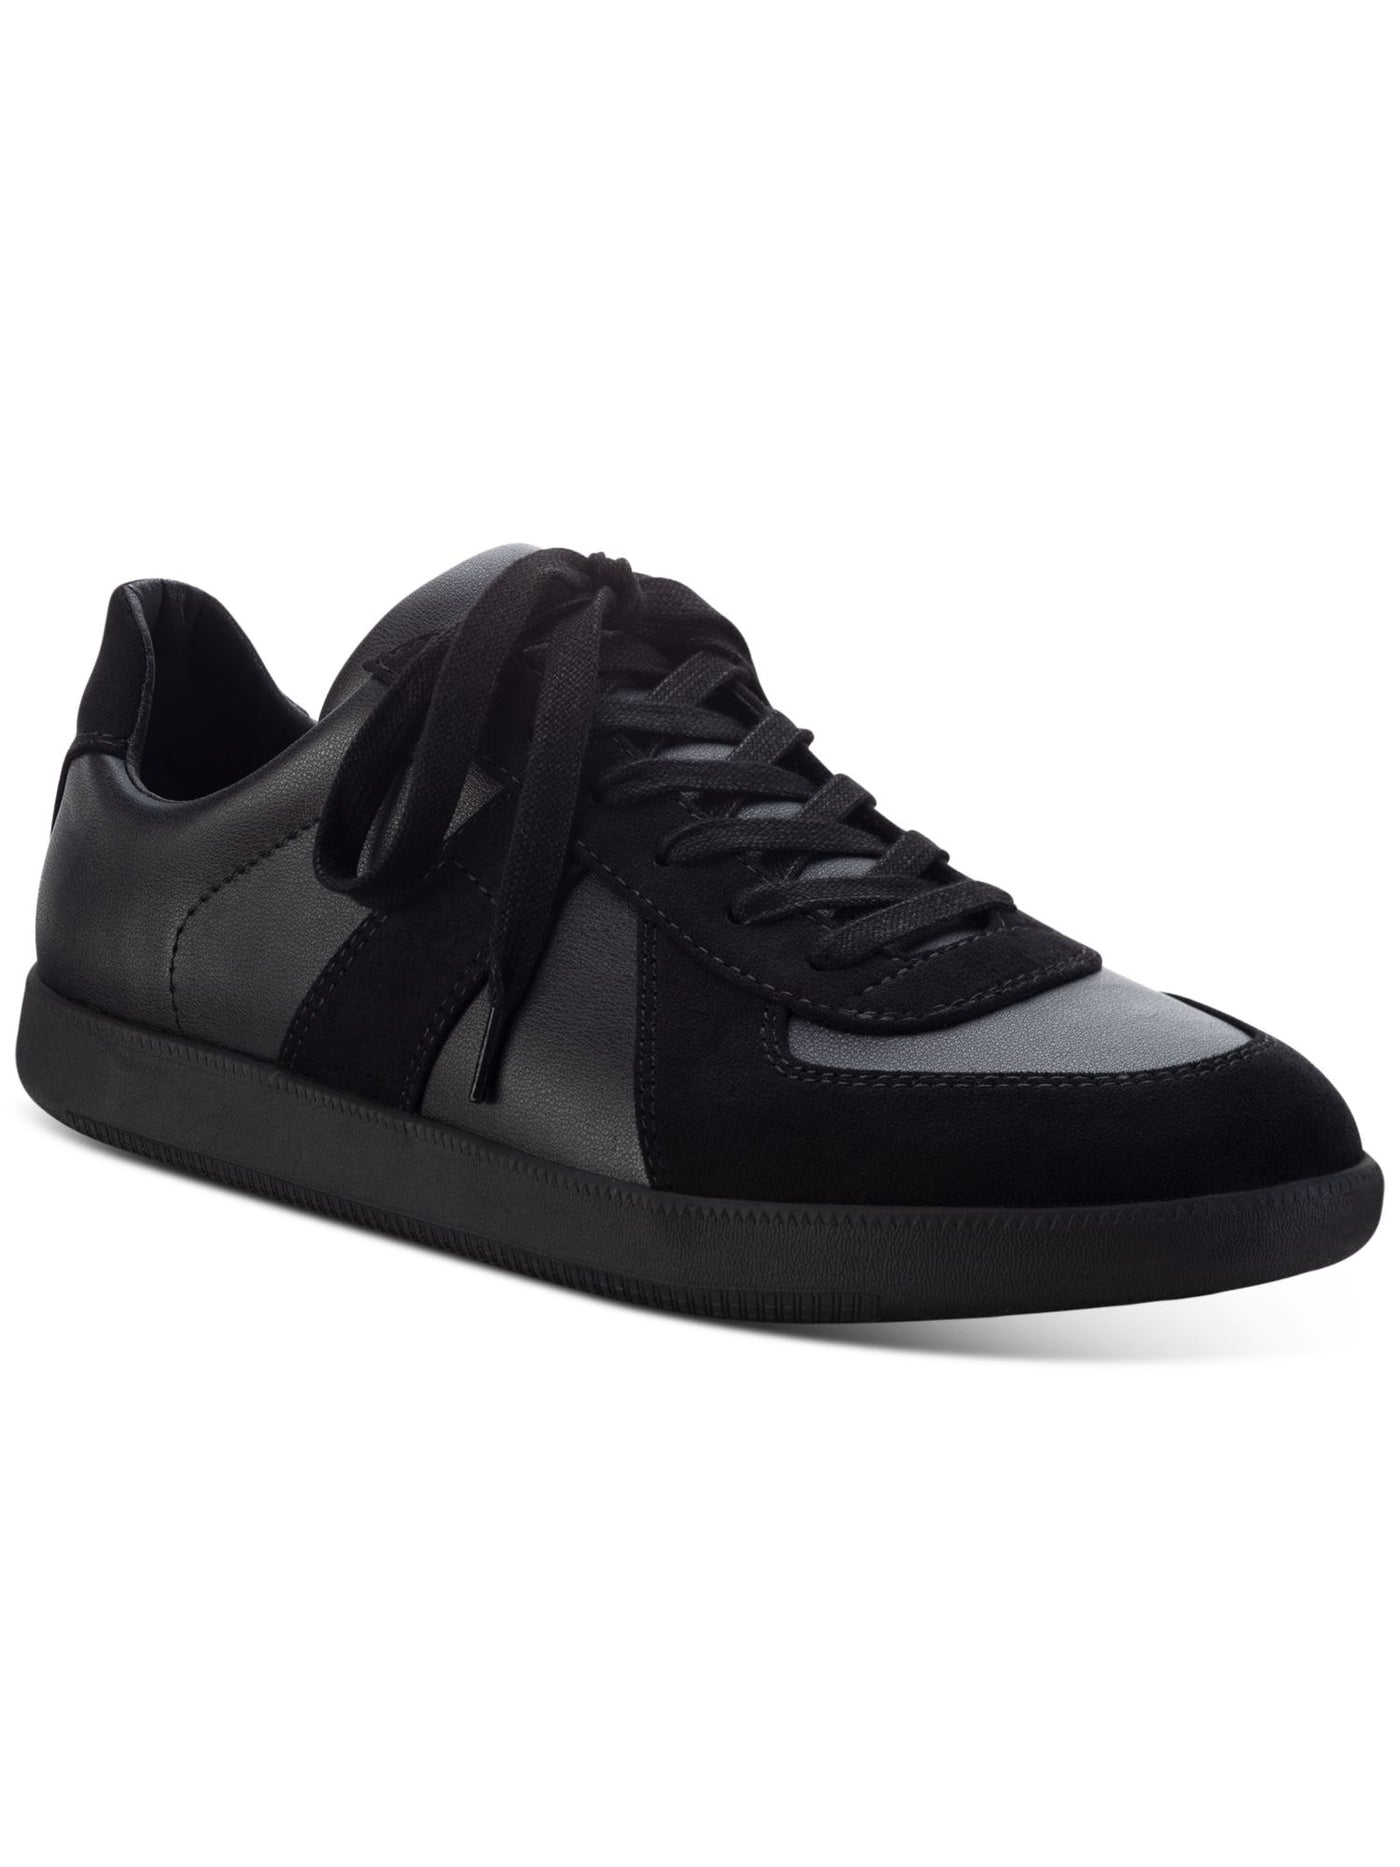 INC Mens Black Padded Court Round Toe Platform Lace-Up Athletic Sneakers Shoes 8 M